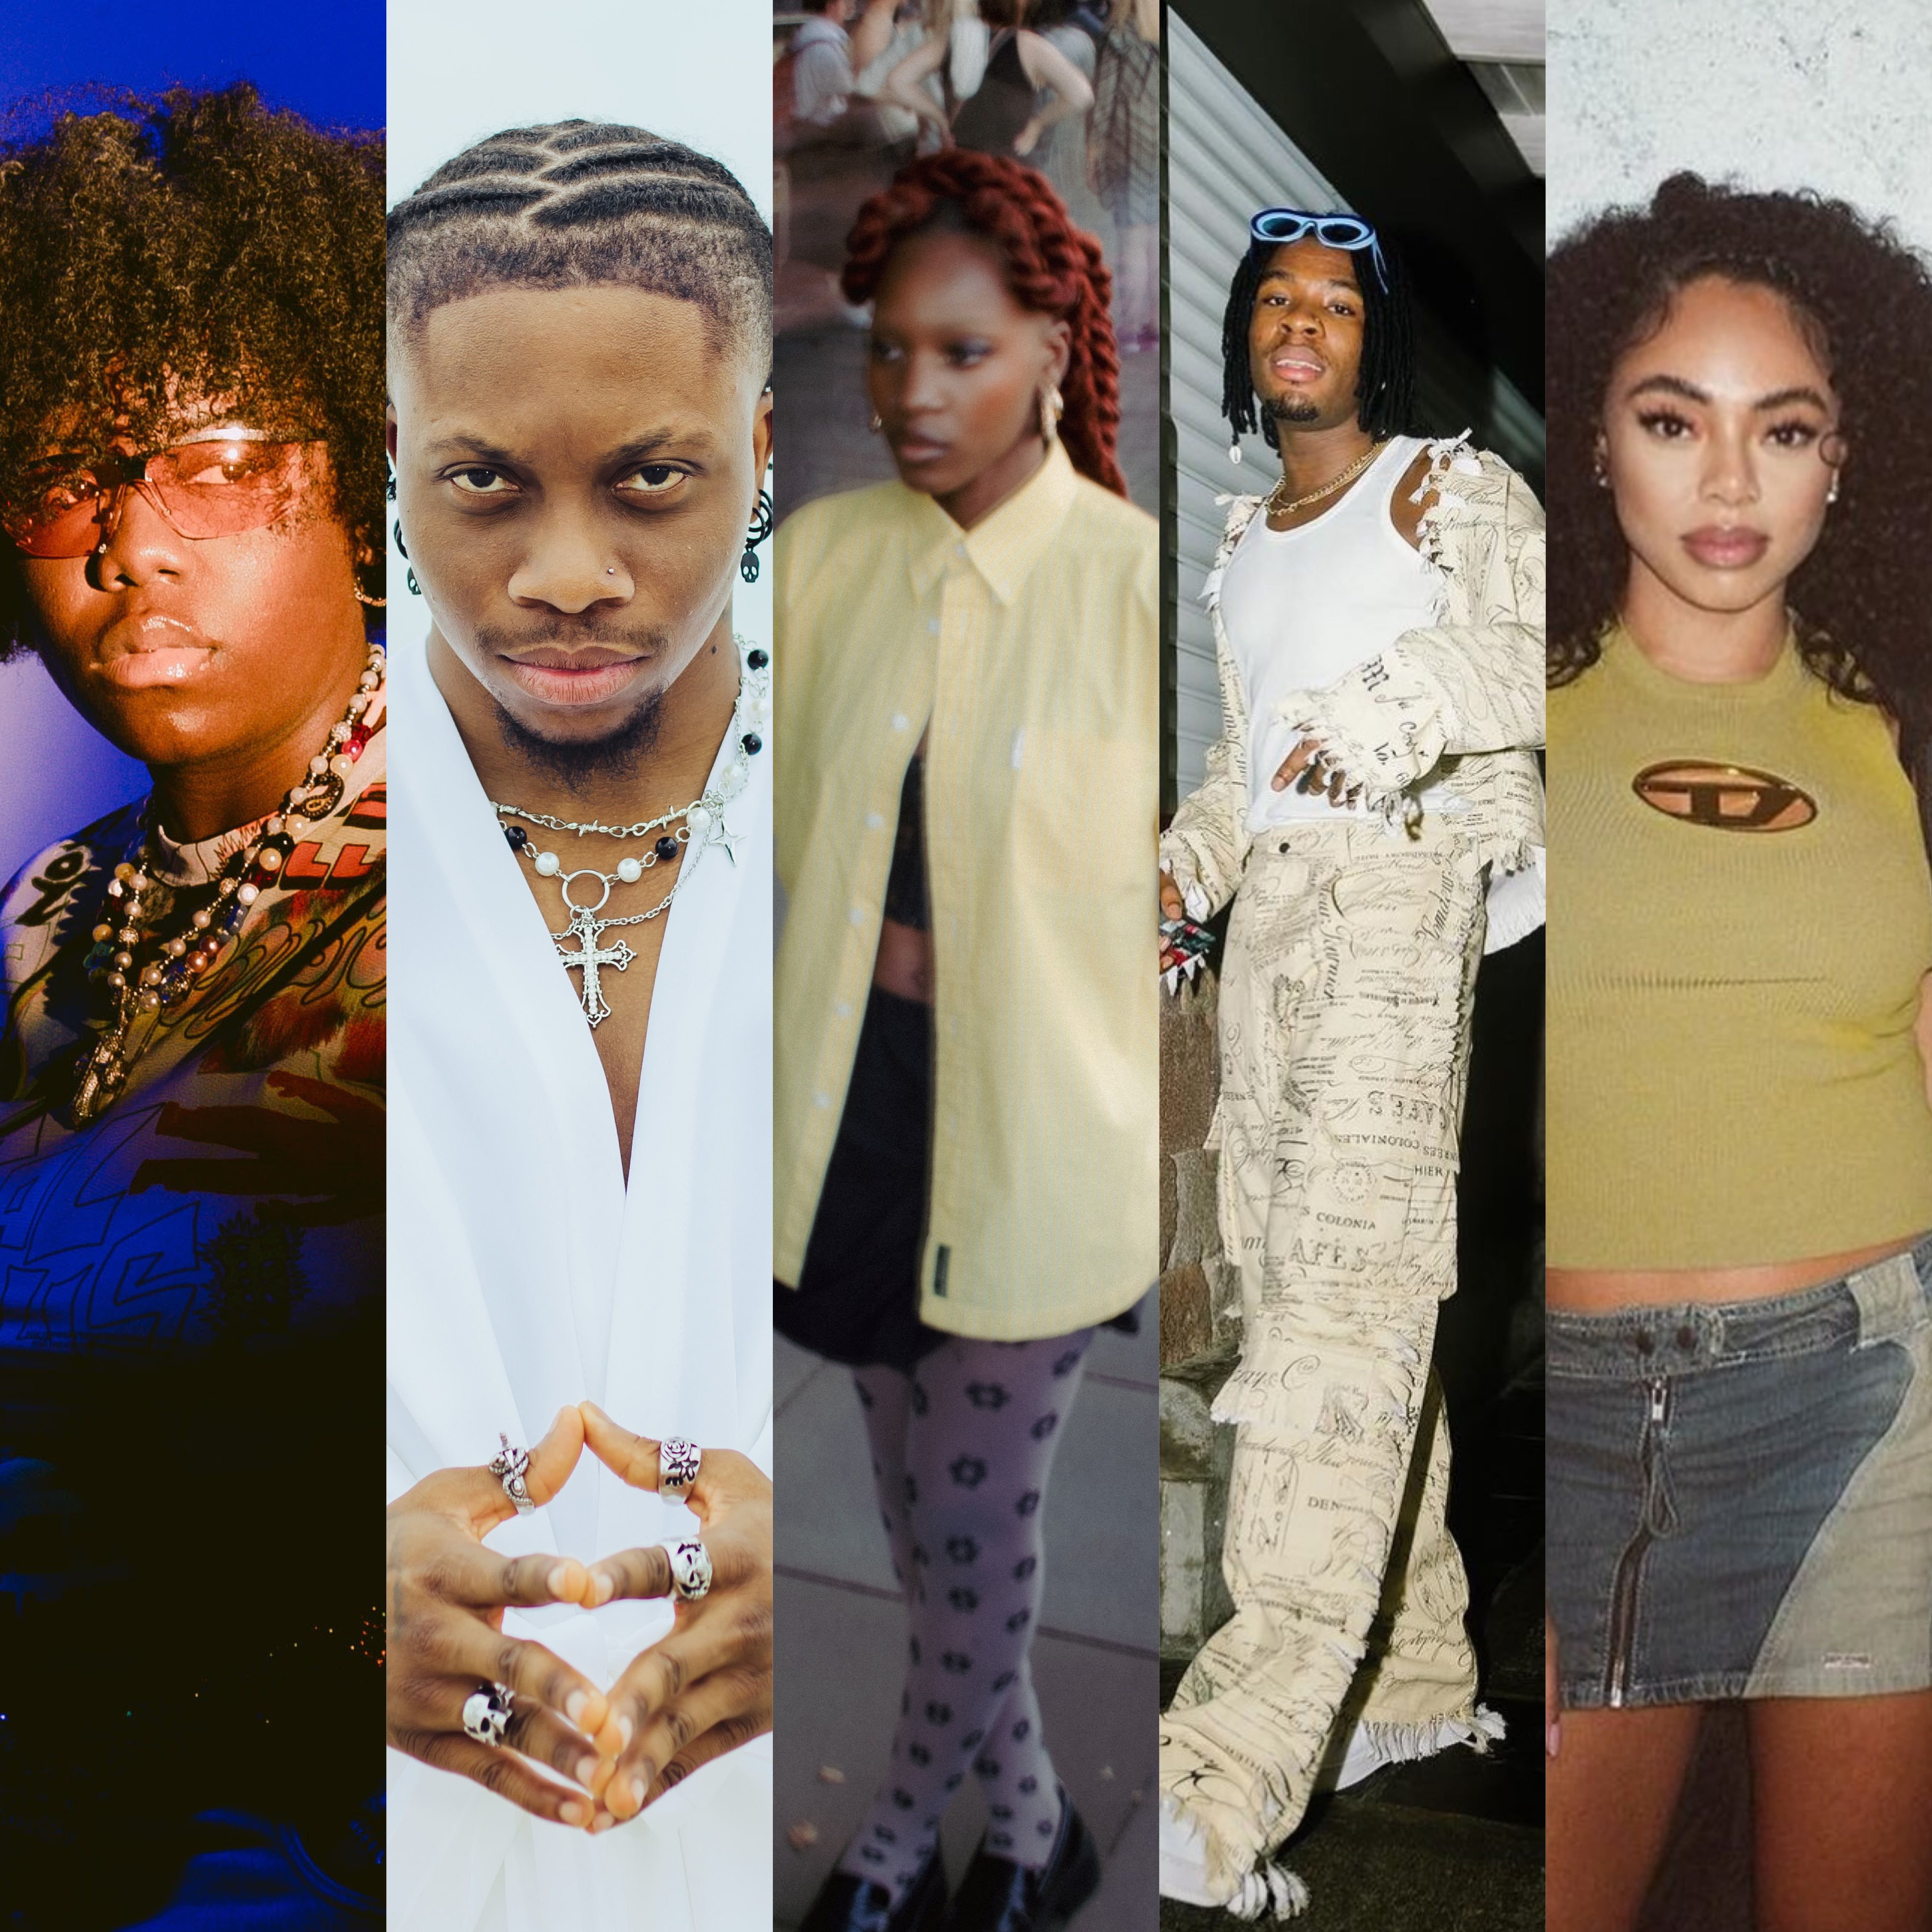 Re Up: The freshest new releases you need to tap into featuring [@TeniEntertainer], [@OxladeOfficial], [@Keys_ThePrince], [@Jaz_Karis], [@Joeboyofficial], [@Its_Daisy_World] & more! 